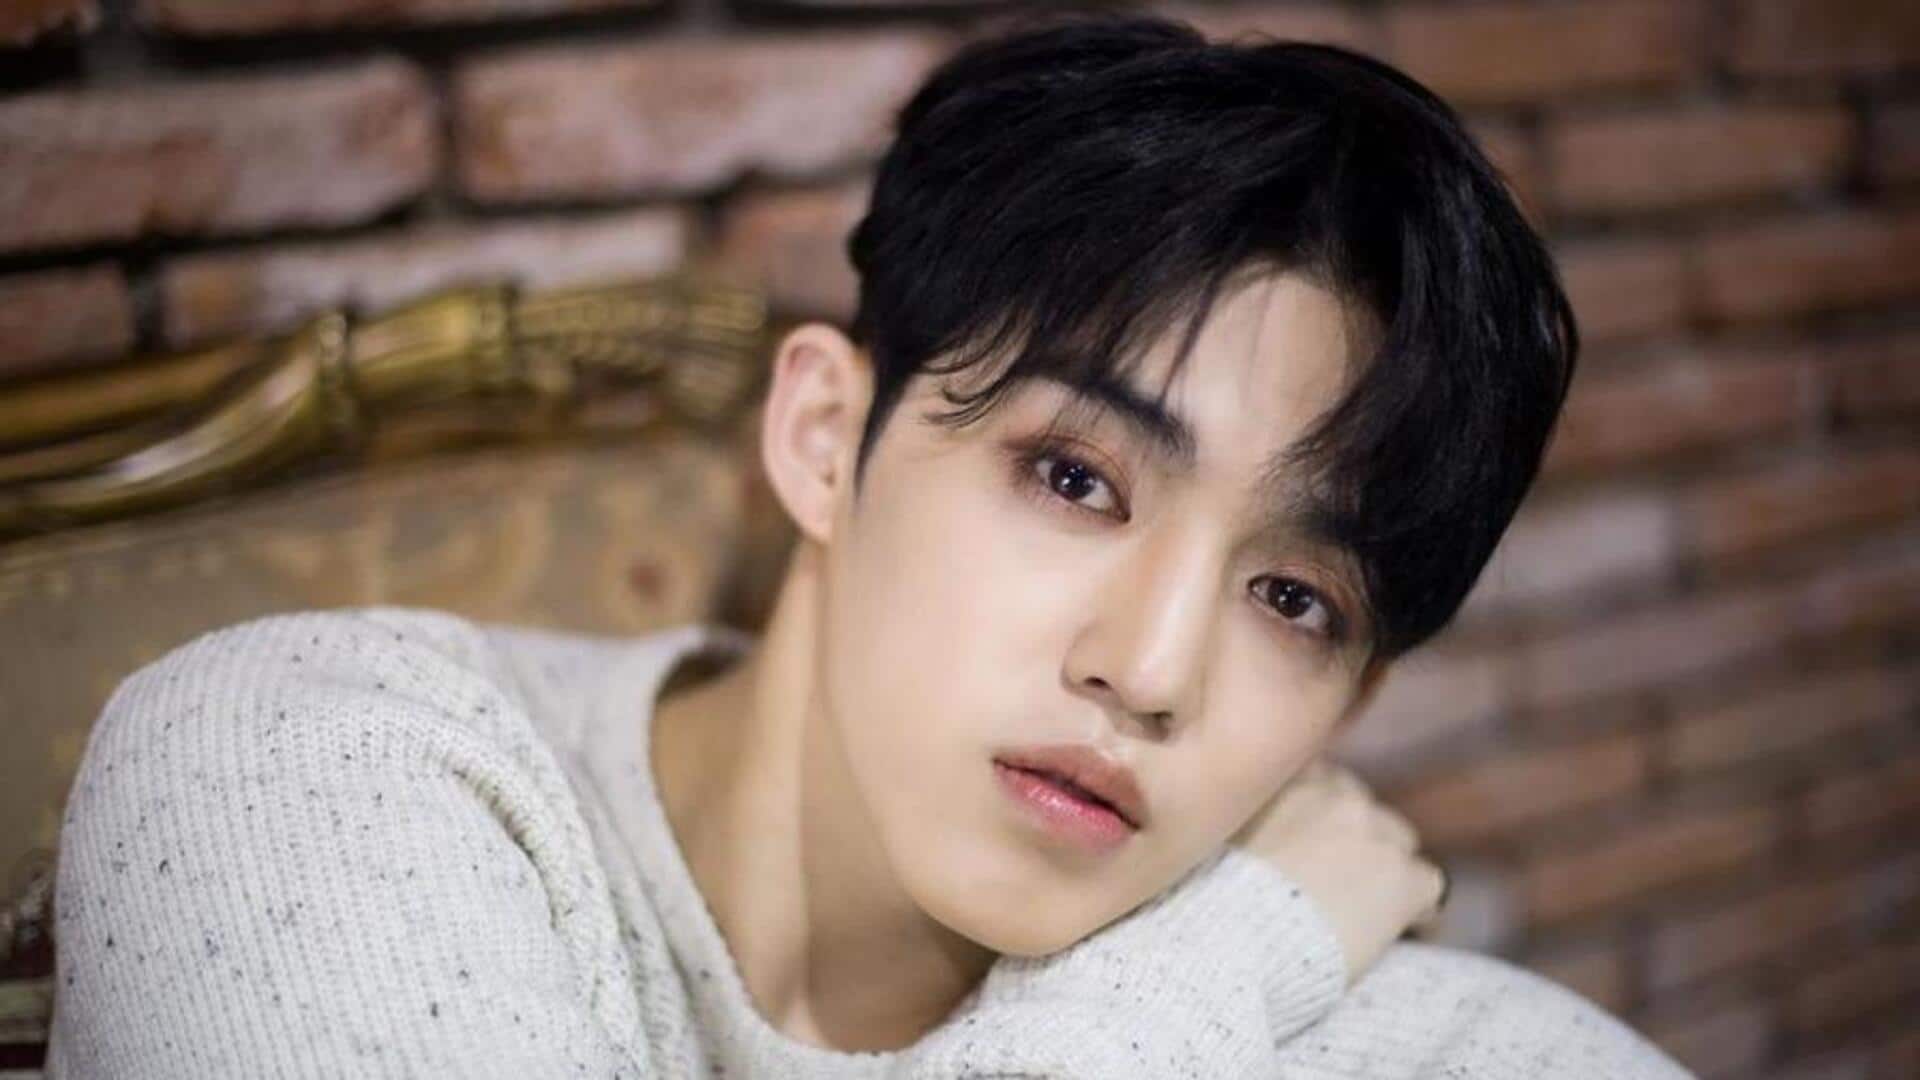 SEVENTEEN's S.Coups exempted from military; agency comments on group's comeback